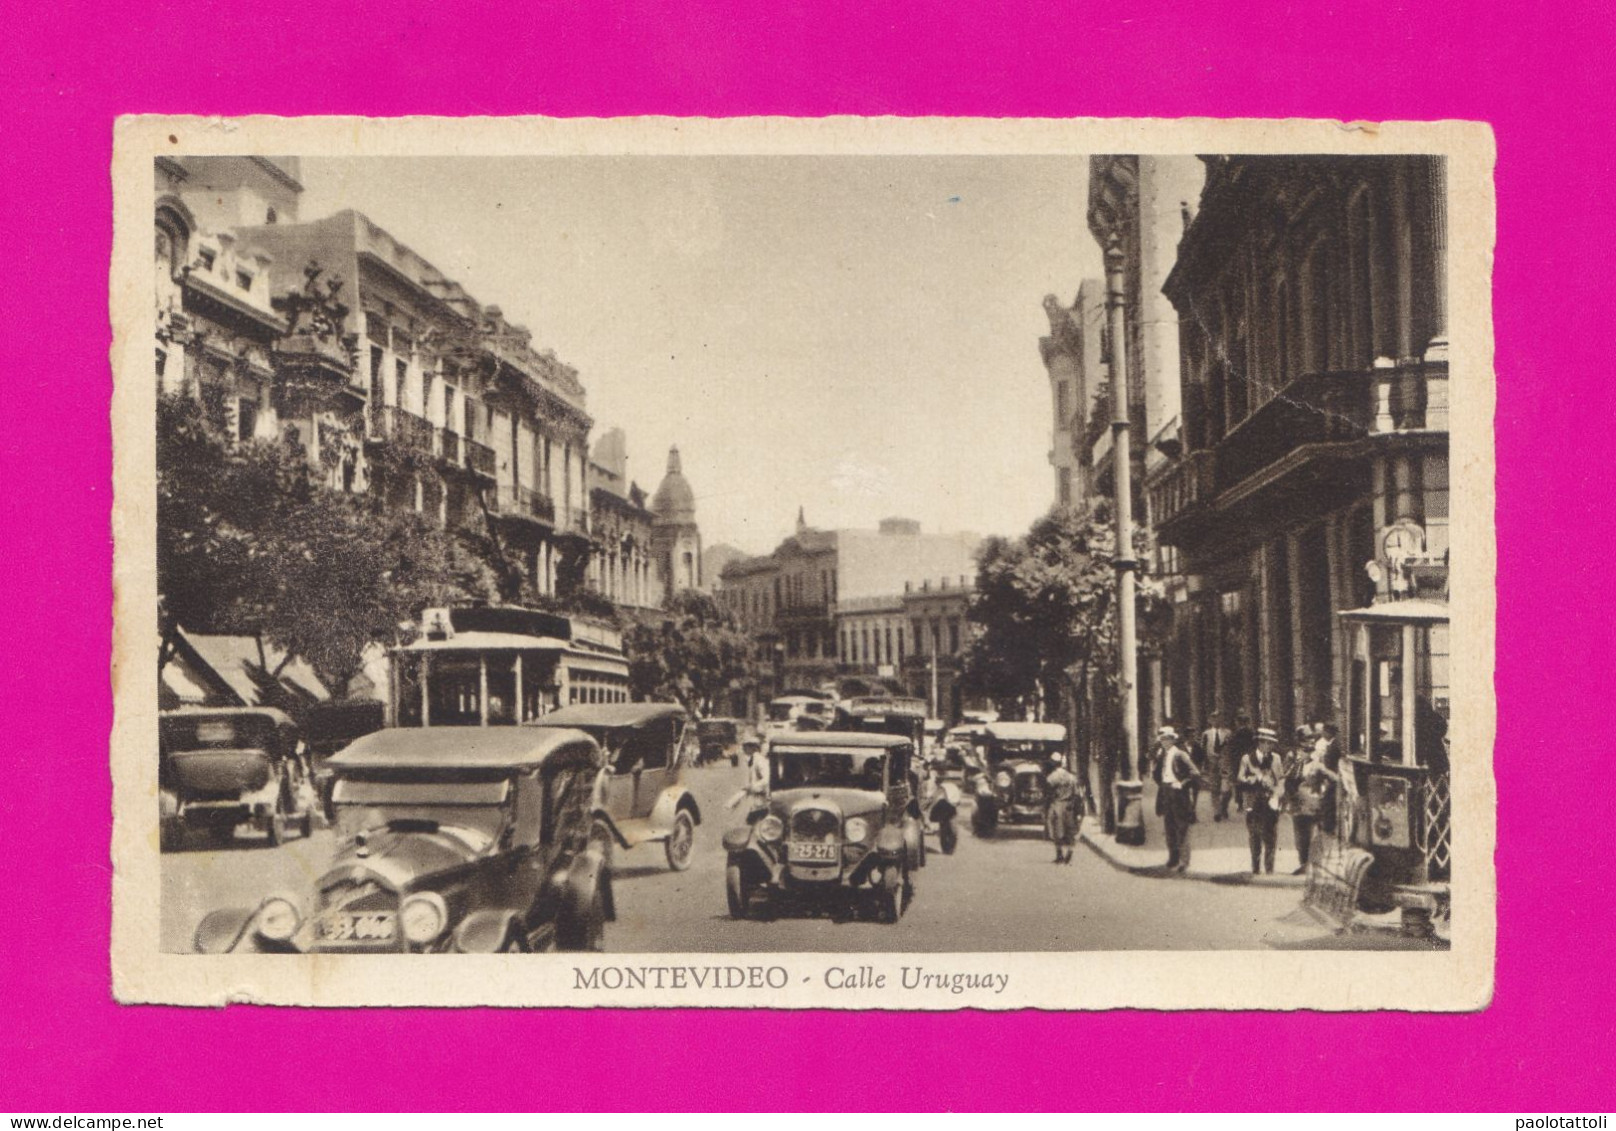 Montevideo. Calle Uruguay - ( Old Cars)- Small Size, Divided Back, Ed. F.Cugnasca, Montevideo. - Uruguay